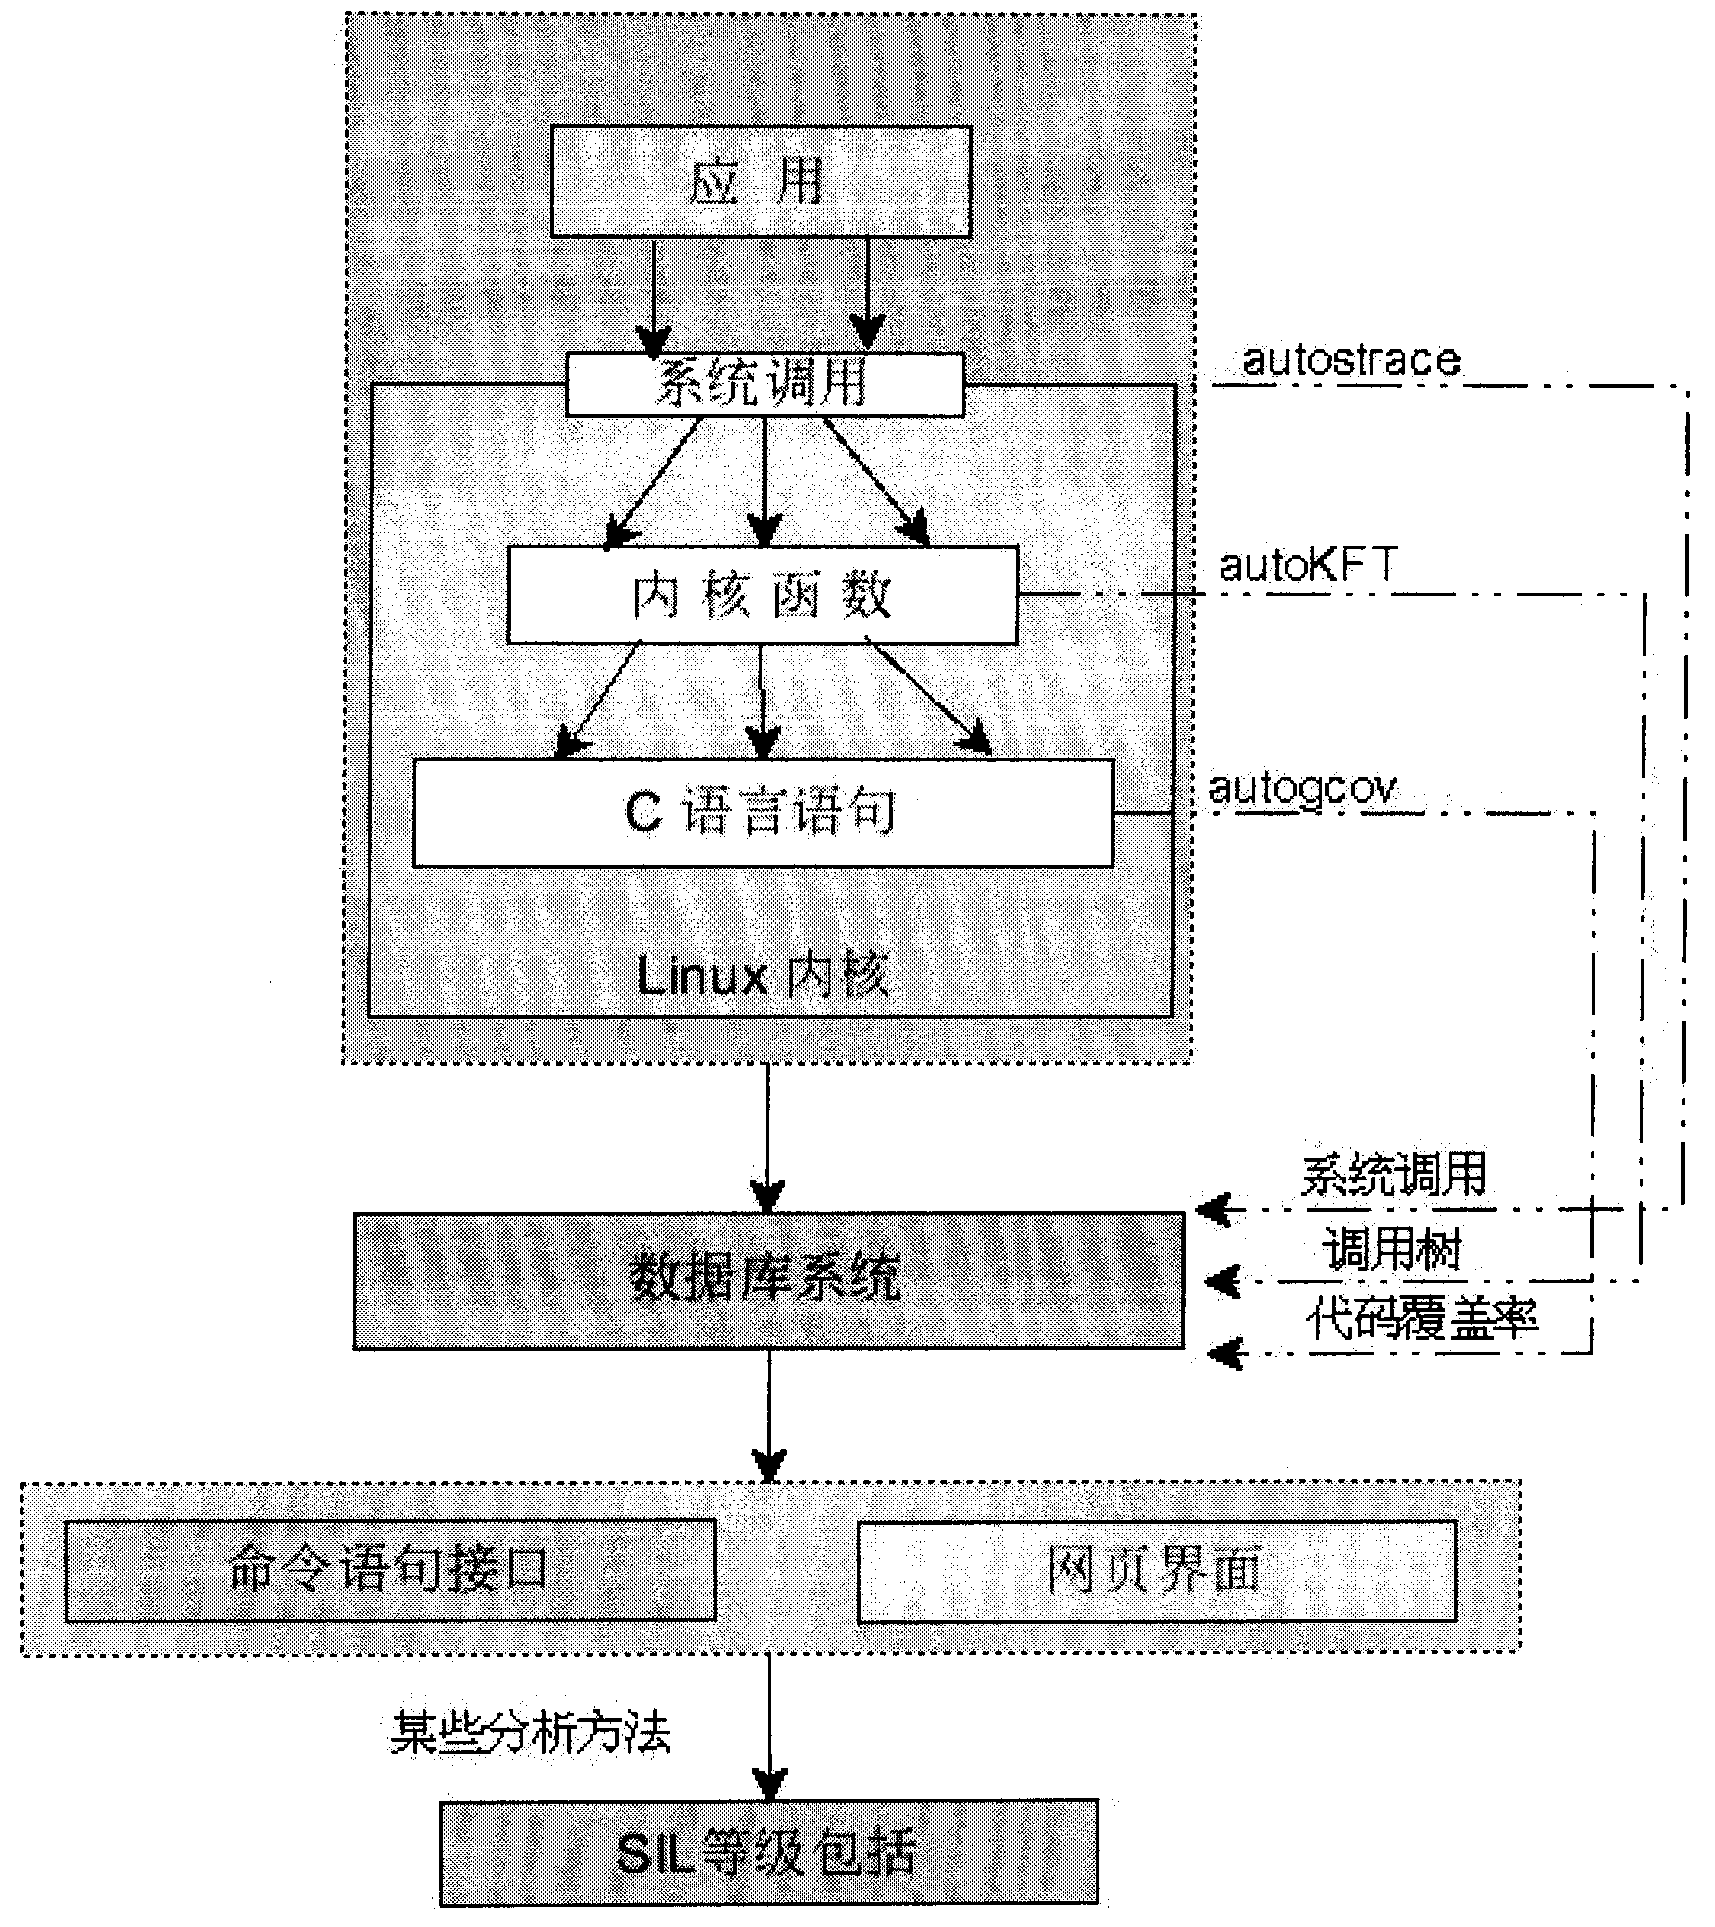 Method for analyzing dynamic execution of Linux kernel